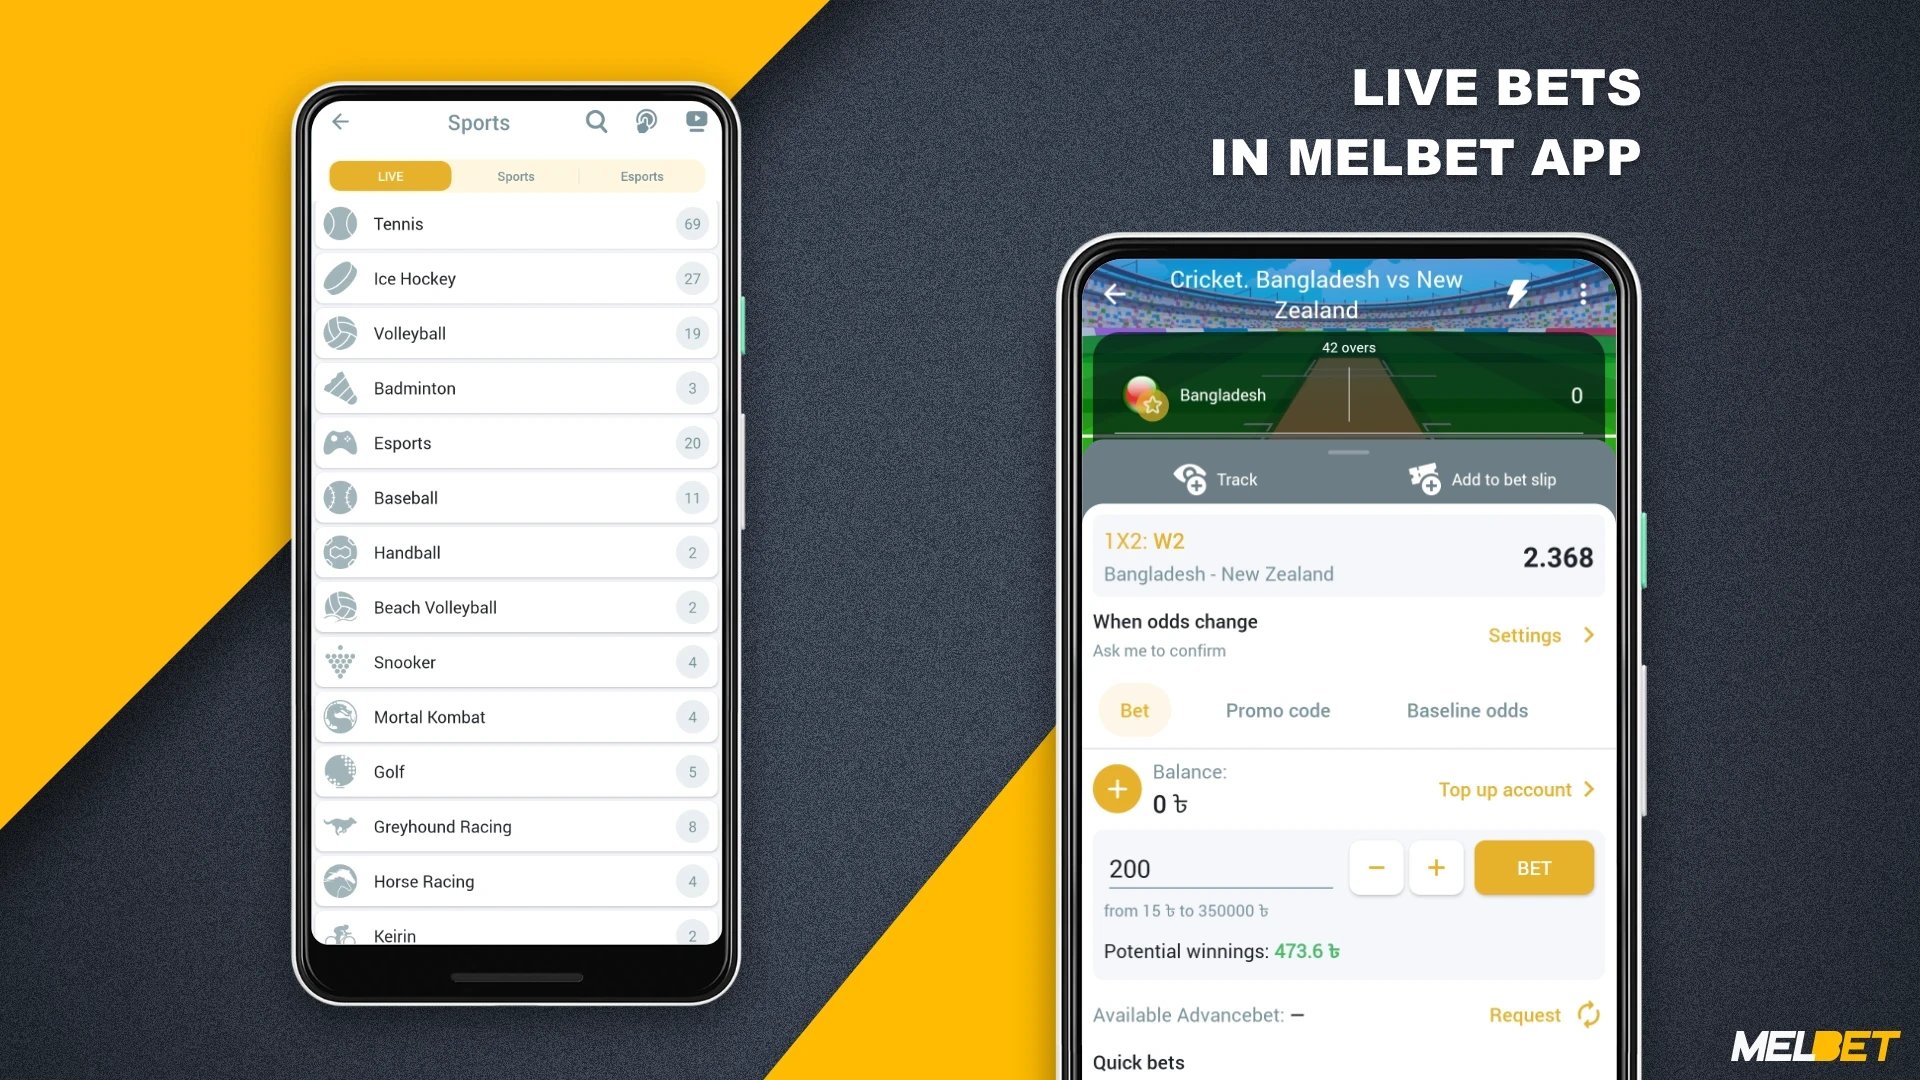 Live bets on various sports are available on the Melbet mobile app for users from Bangladesh